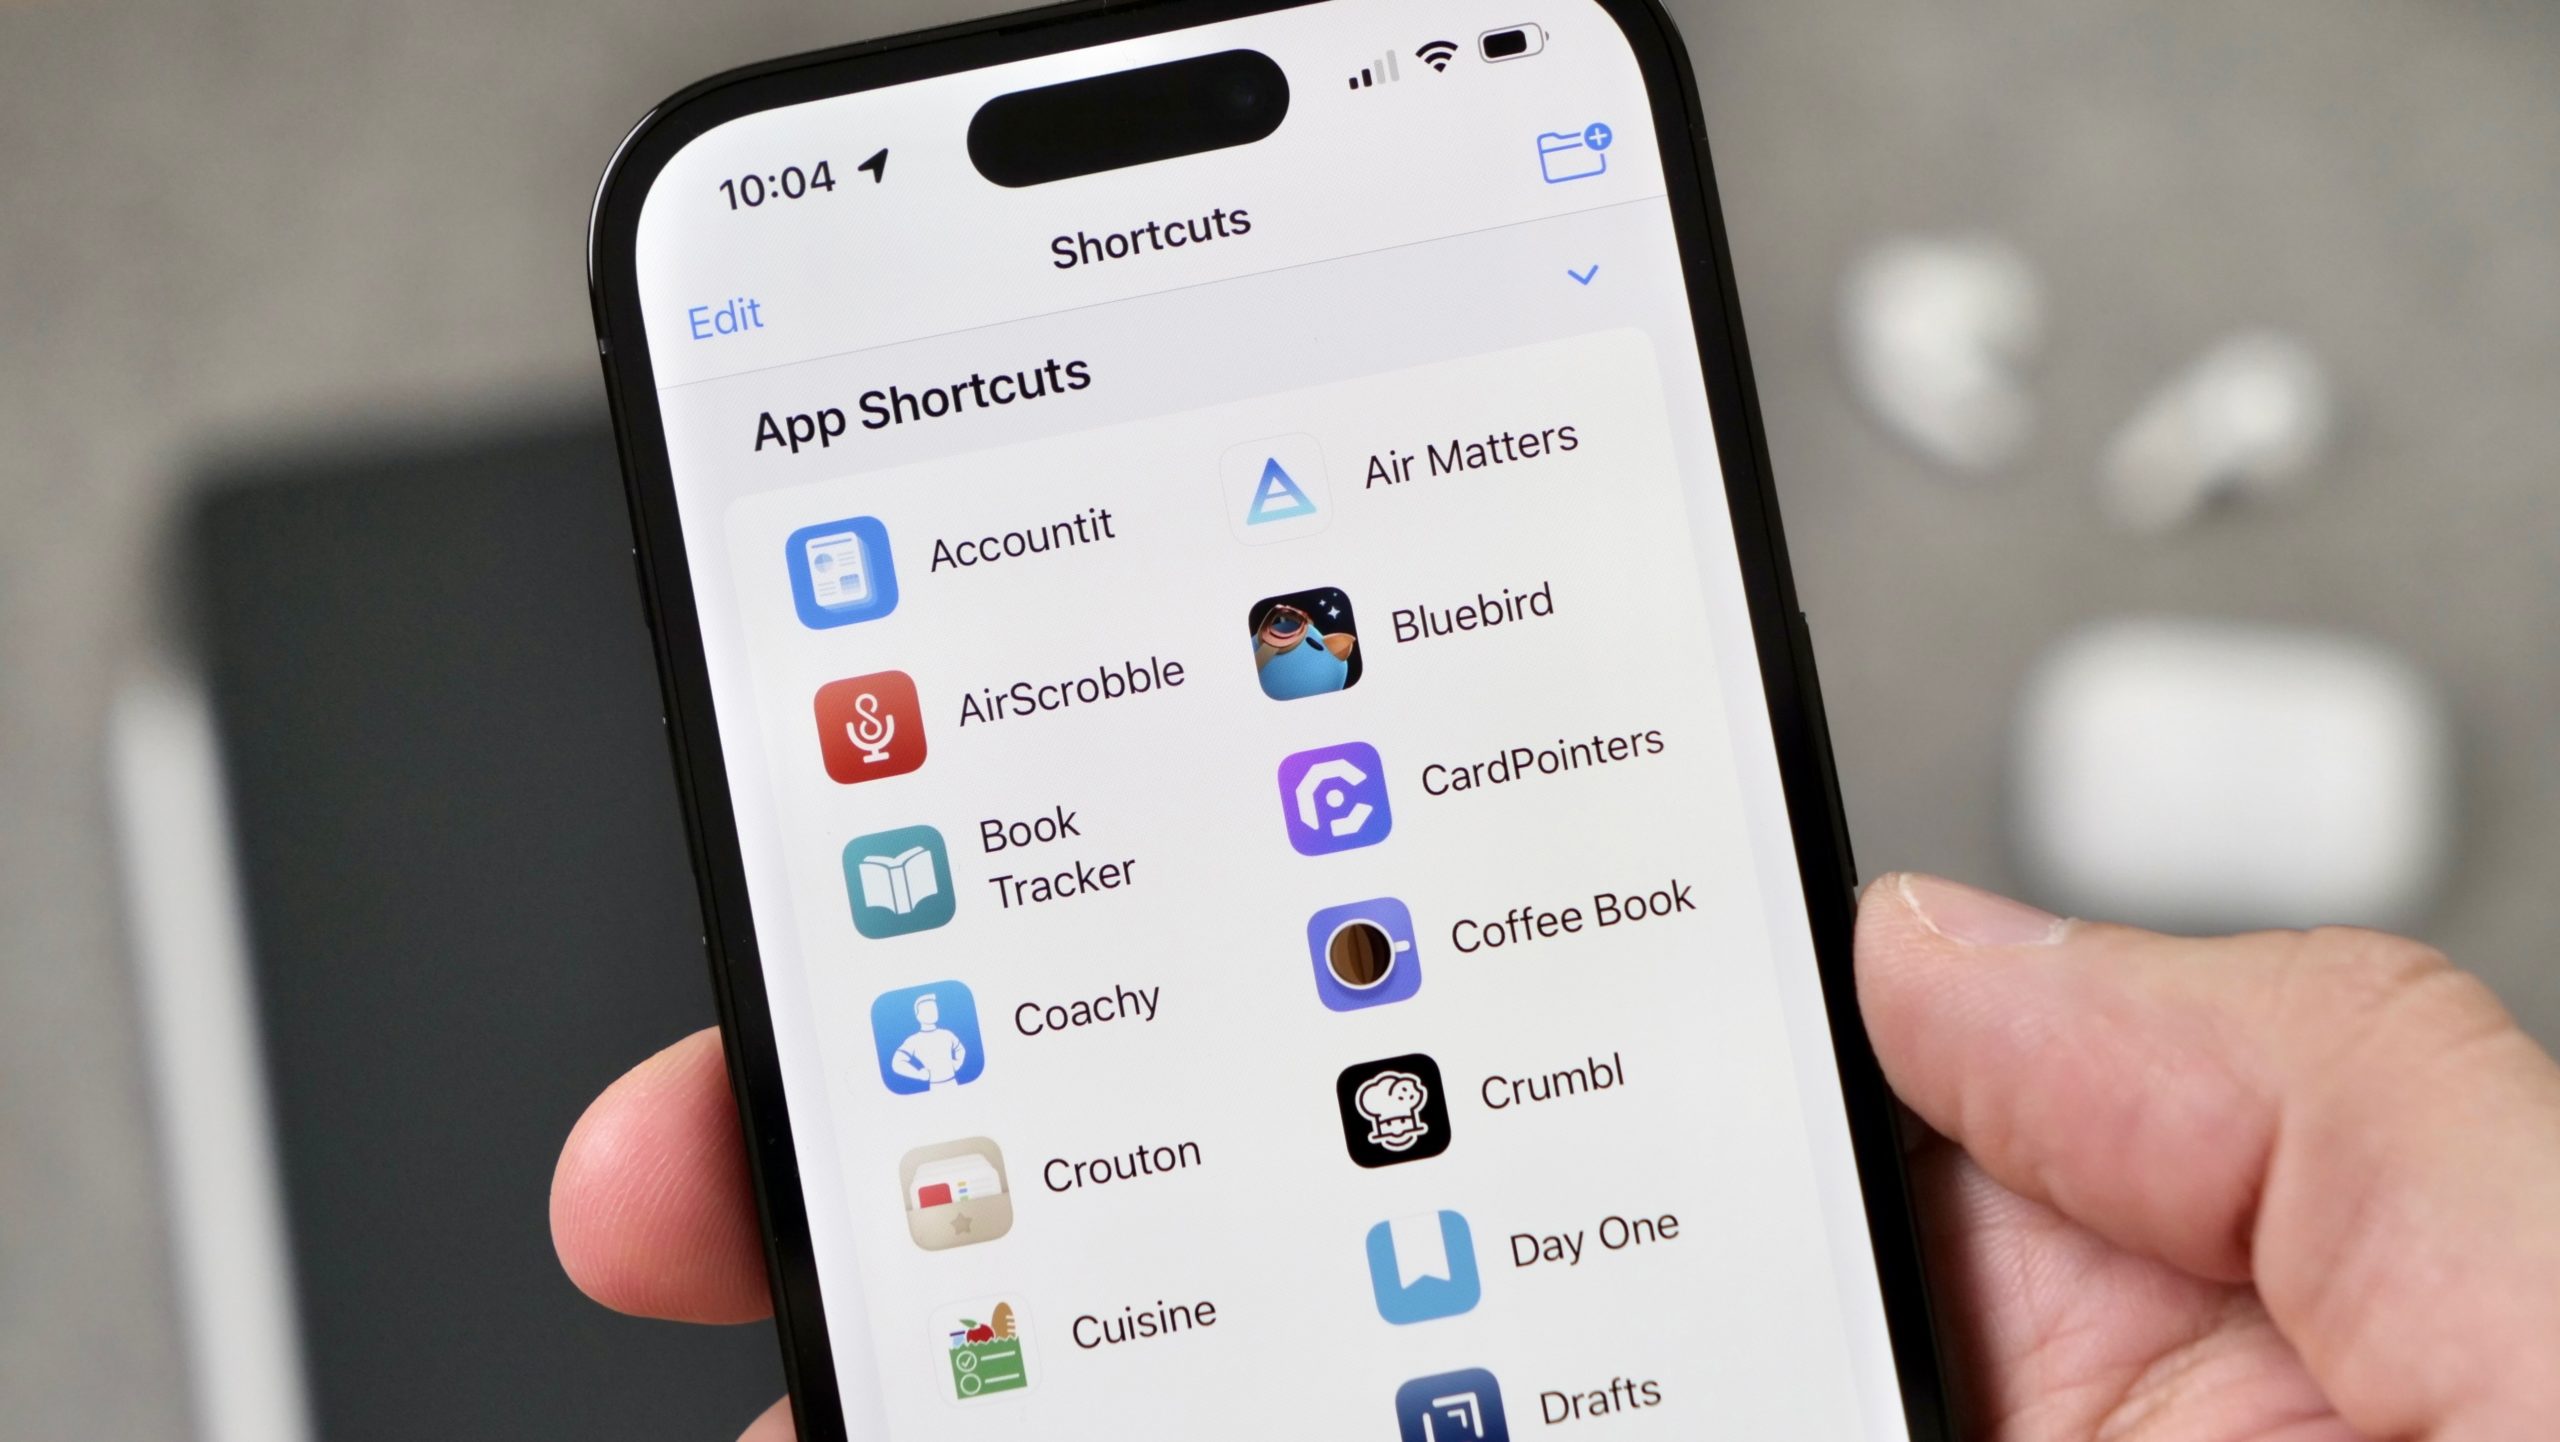 50+ apps that work with App Shortcuts in iOS 16 Matthew Cassinelli